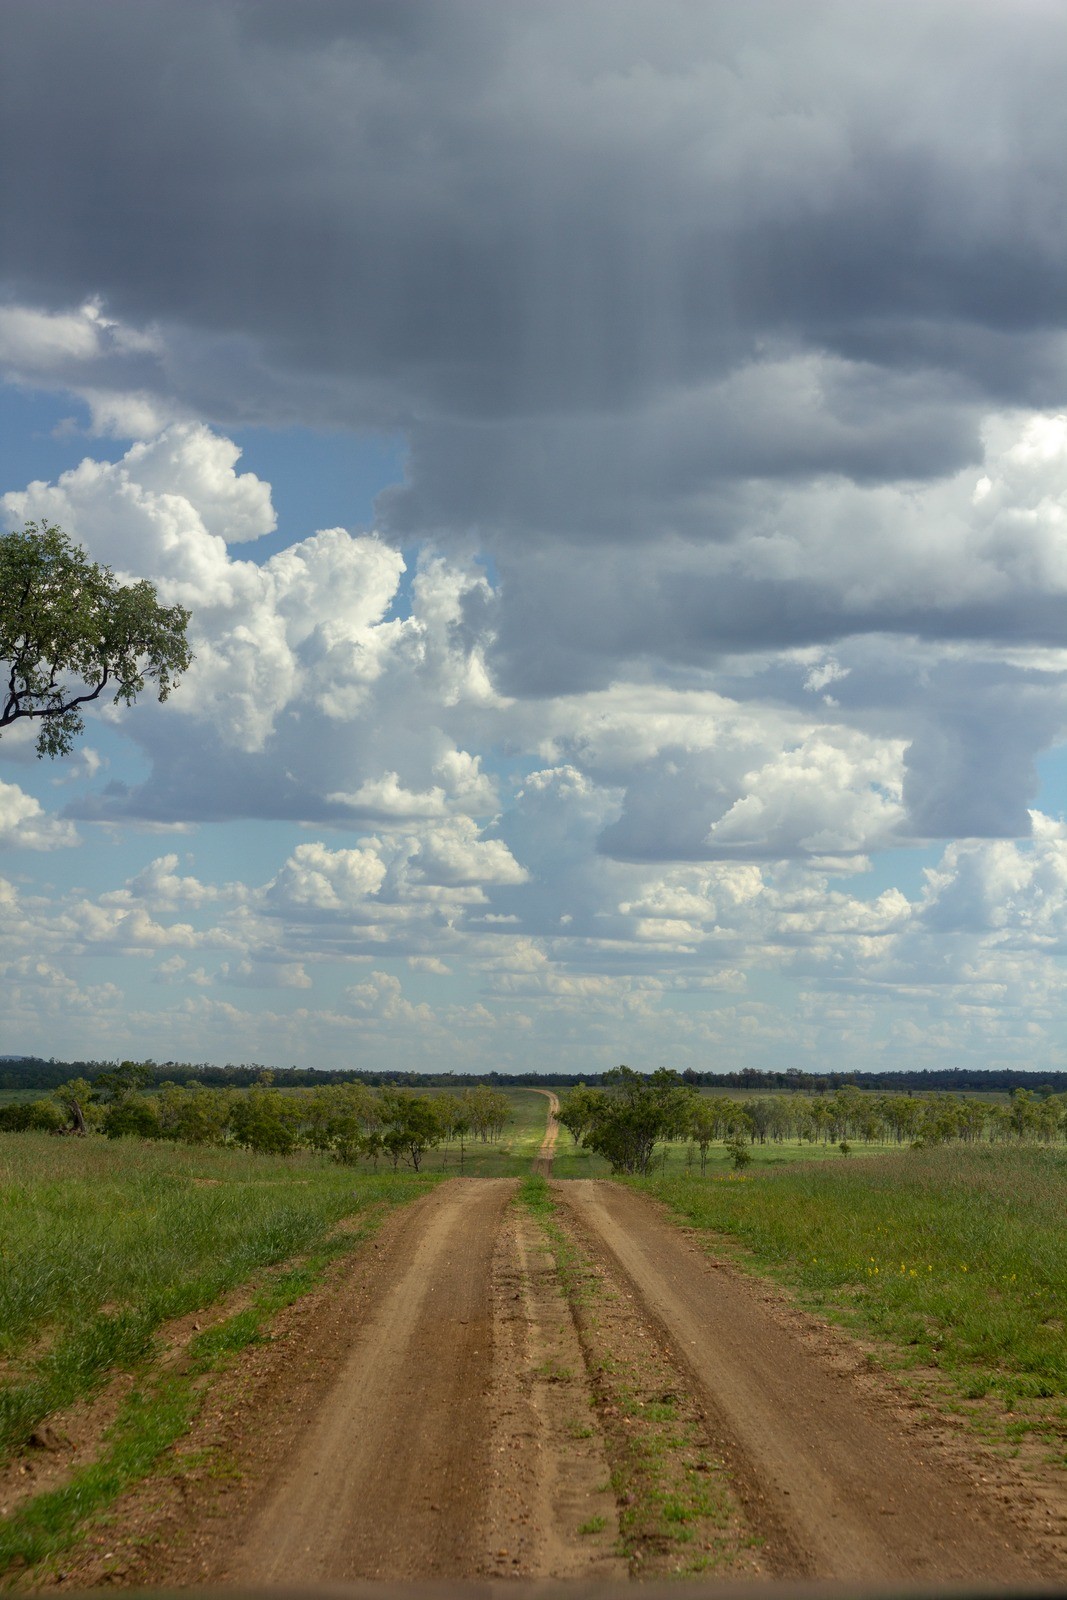 View of dirt road through green pastures and trees clouds in the sky 